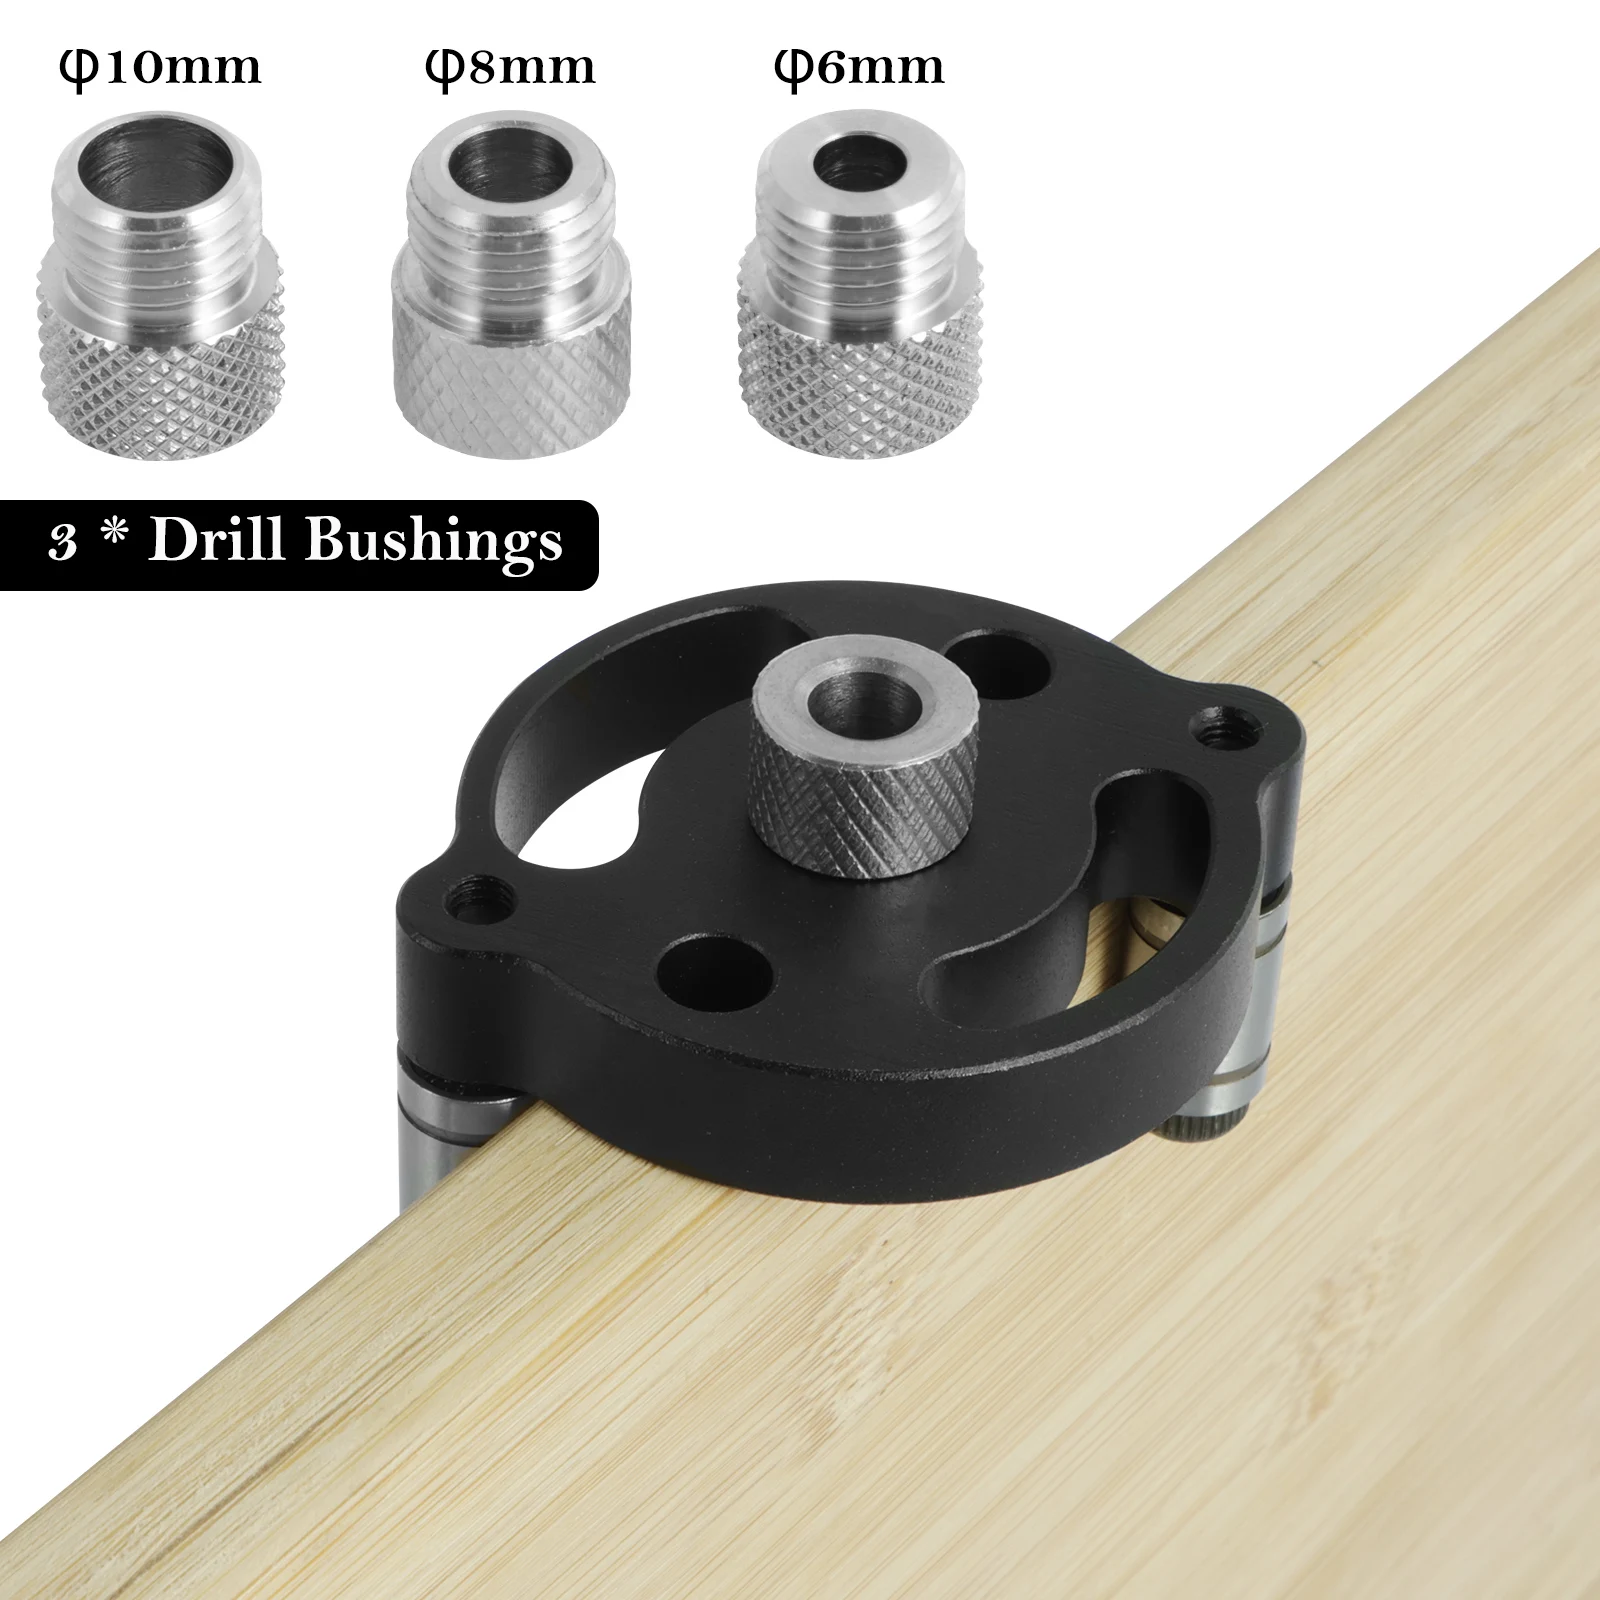 

Doweling Jig Kit Aluminum Alloy Dowel Drilling Guide 6/8/10mm Hole Punching Locator Self Centering Drill Guide Woodworking Tool